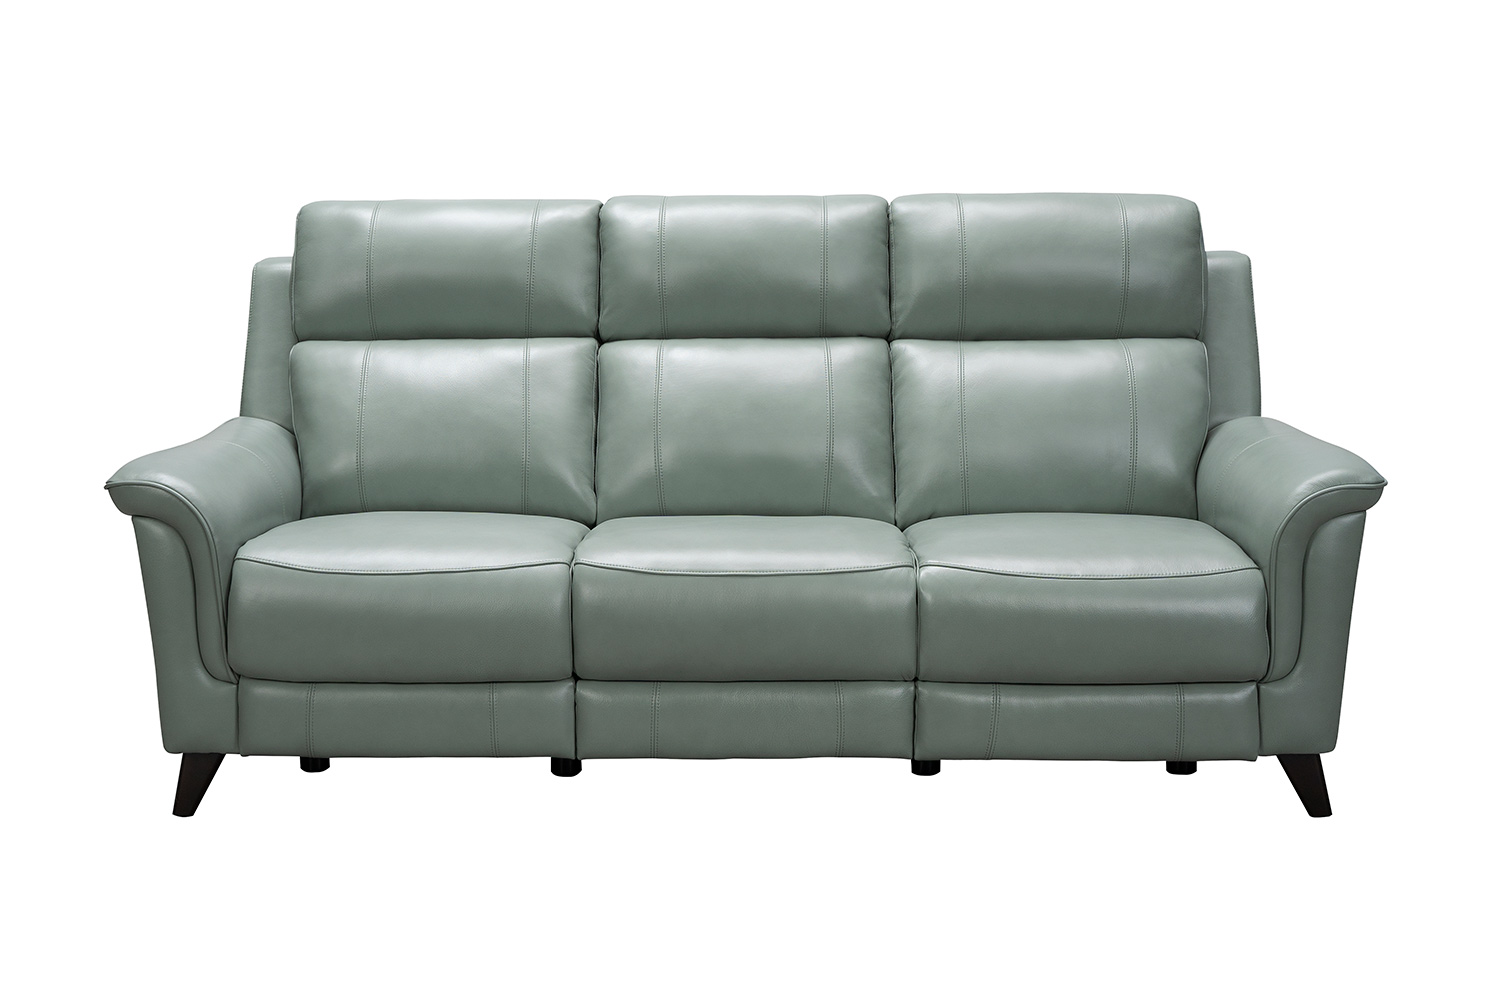 Barcalounger Kester Power Reclining Sofa with Power Head Rests - Lorenzo Mint/Leather match